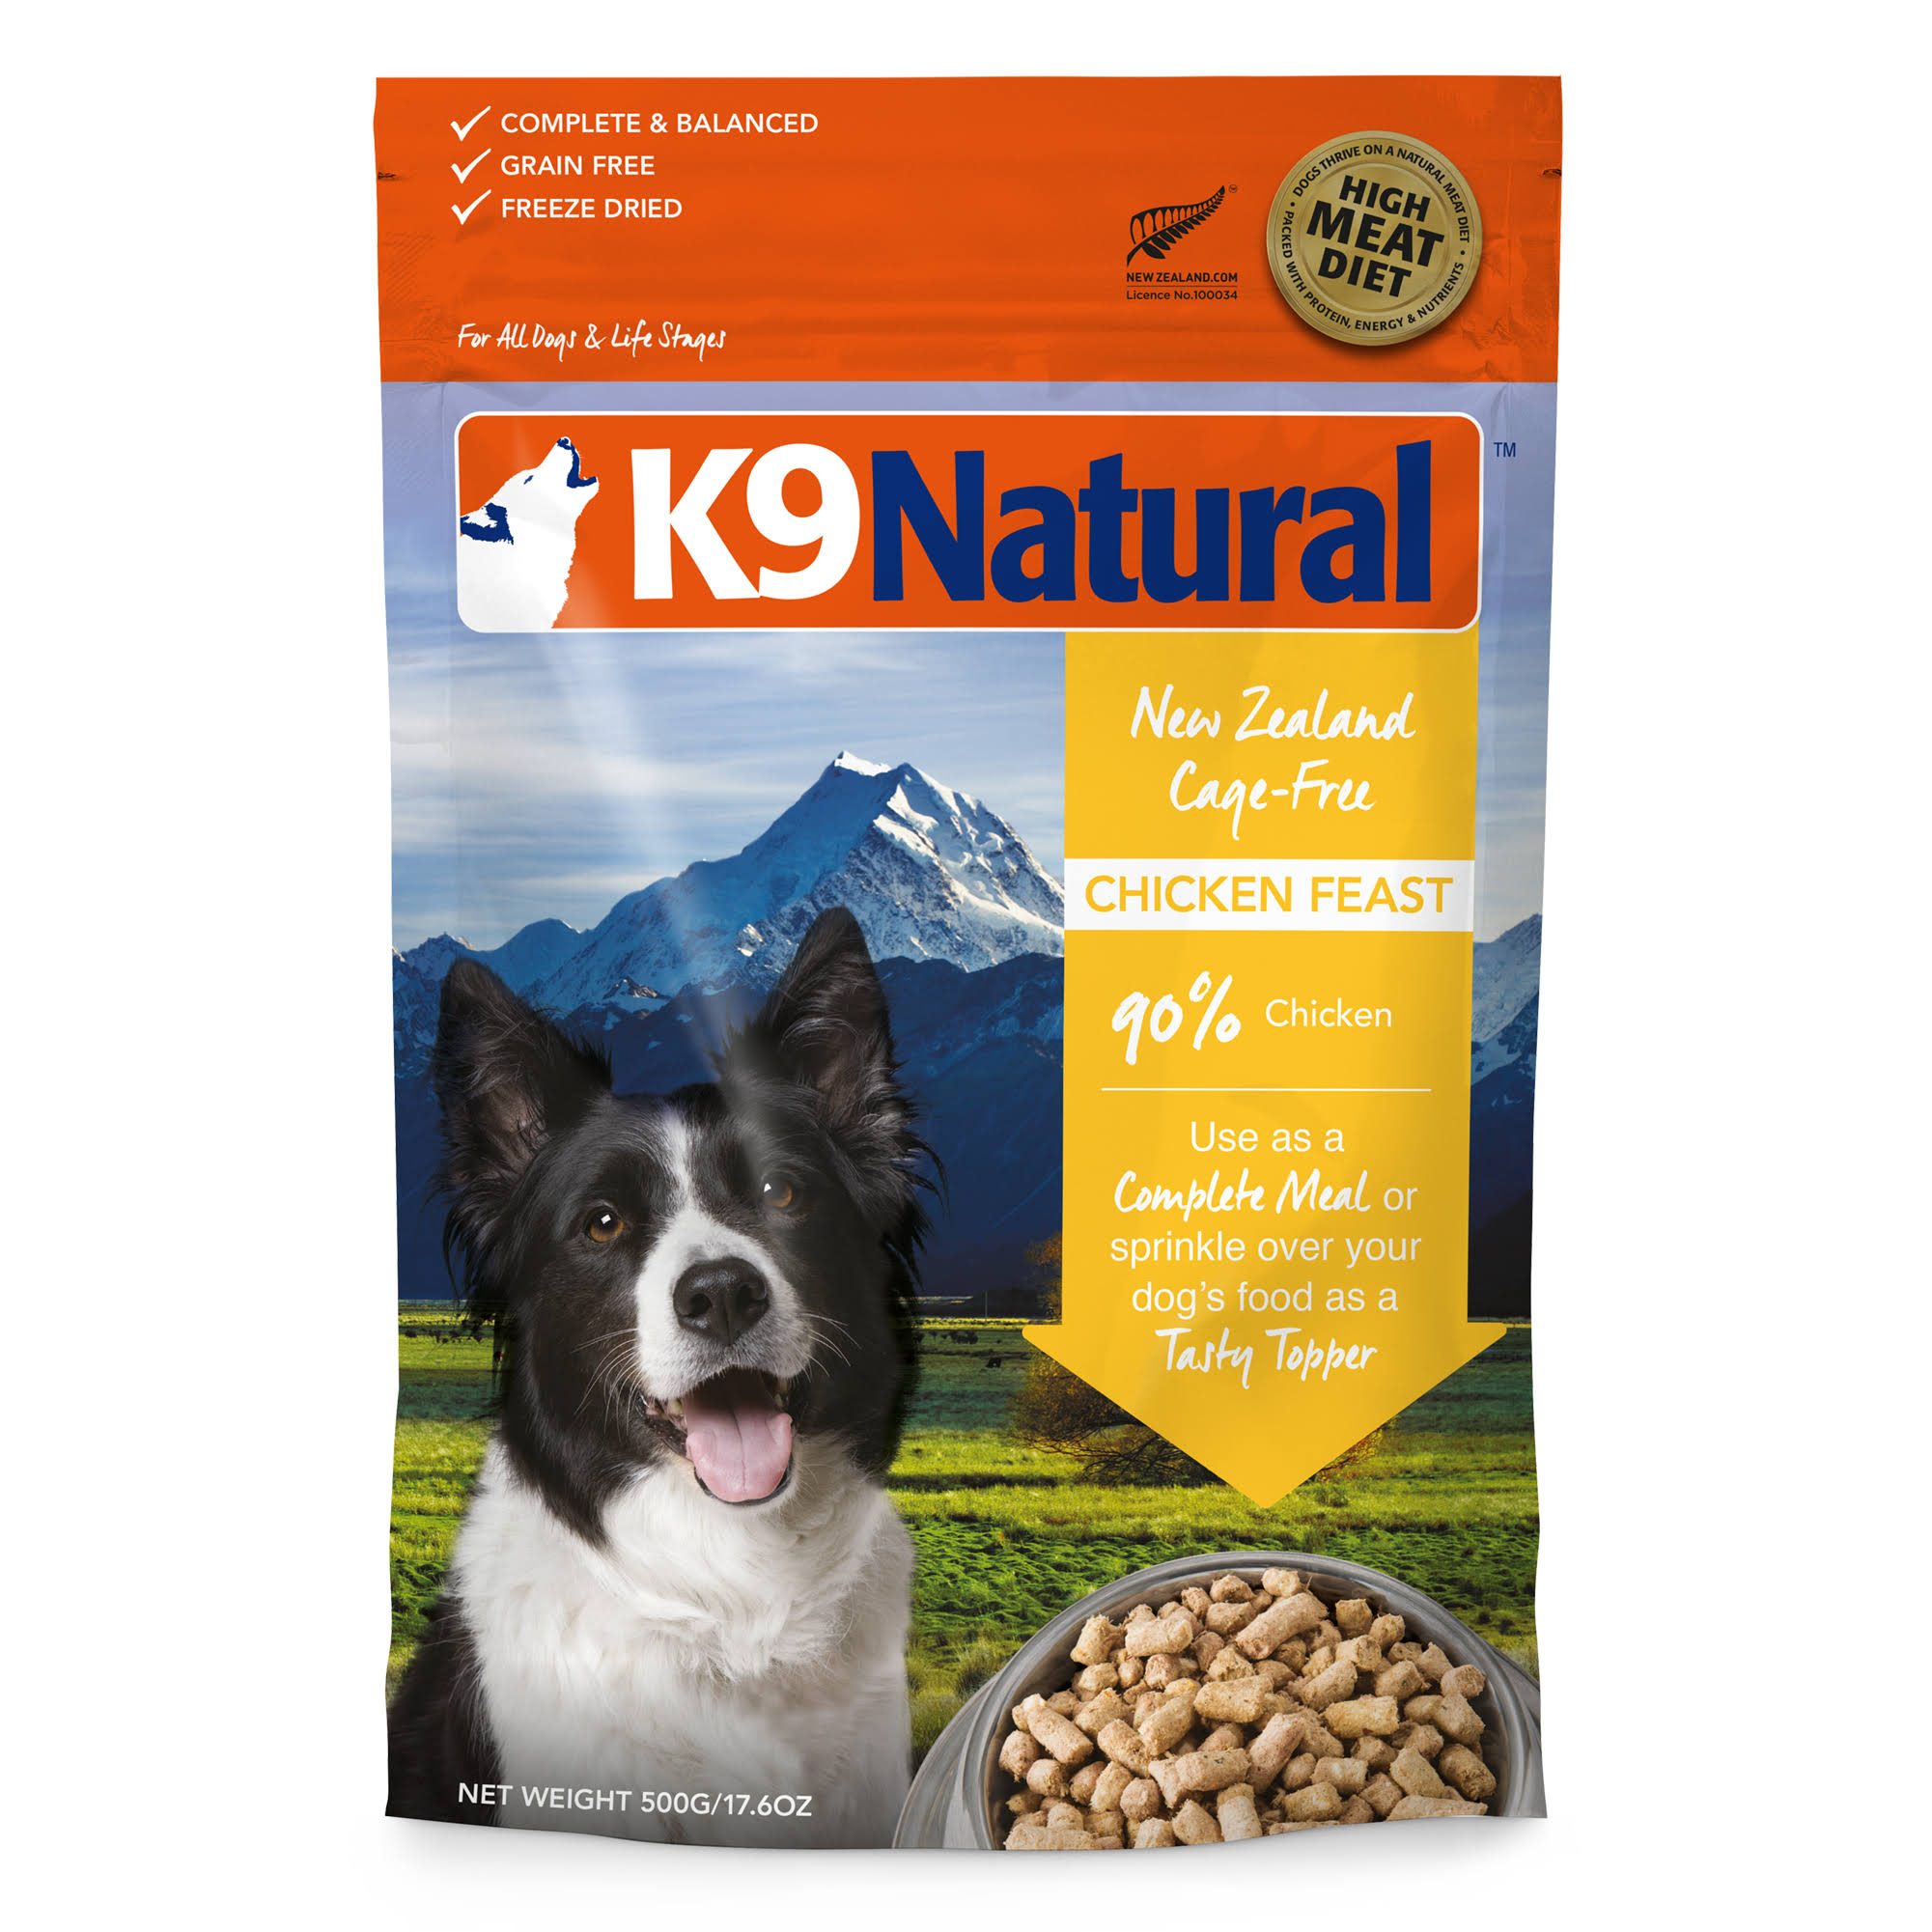 K9 Natural Freeze Dried Dog Food - Chicken Feast, 2.2lbs